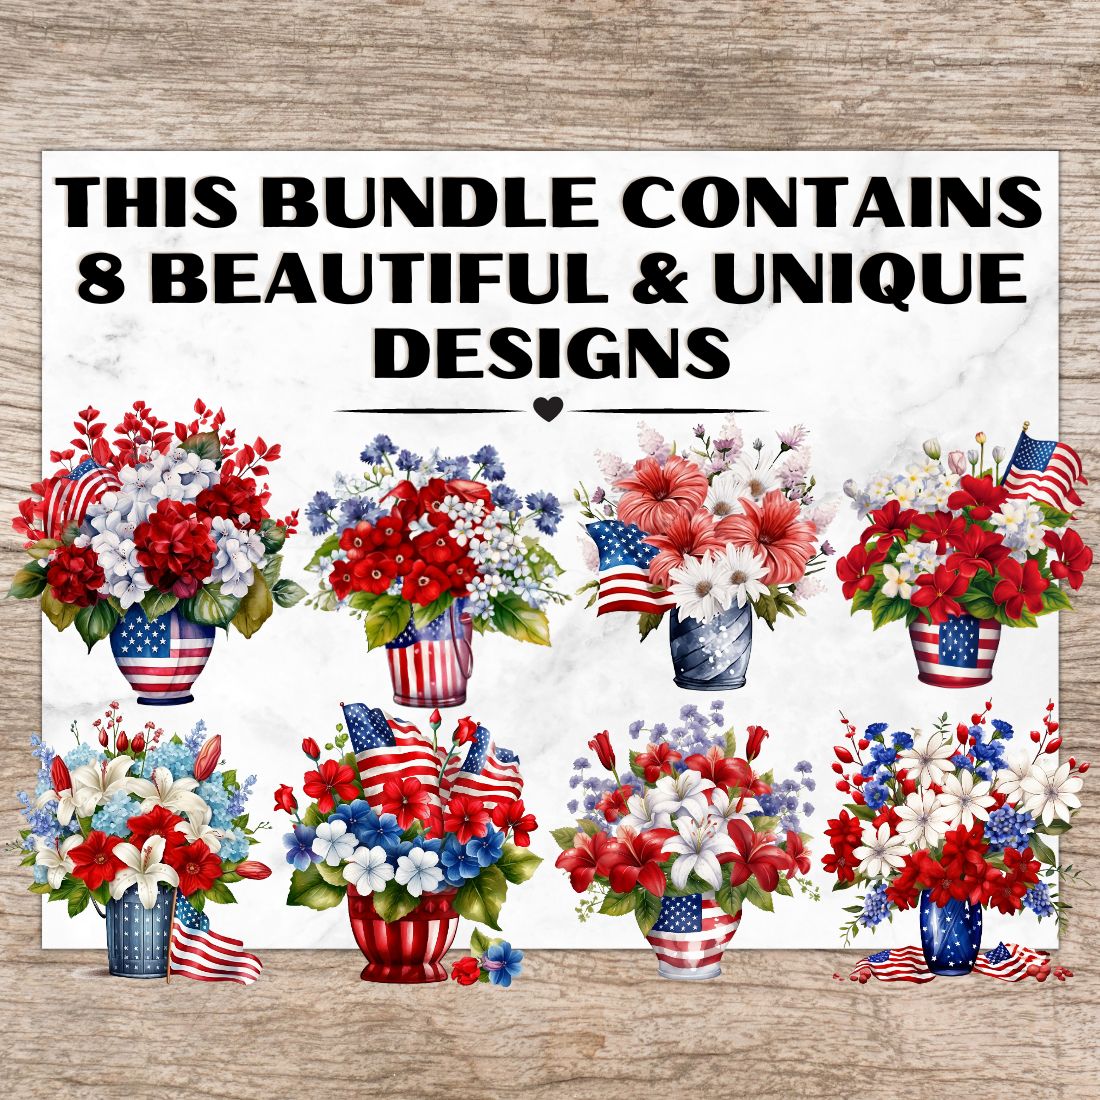 8 American Flag 4th July Flower Arrangement PNG, Watercolor Clipart, 4th of July Flowers, Transparent PNG, Digital Paper Craft, Watercolor Clipart for Scrapbook, Invitation, Wall Art, T-Shirt Design preview image.